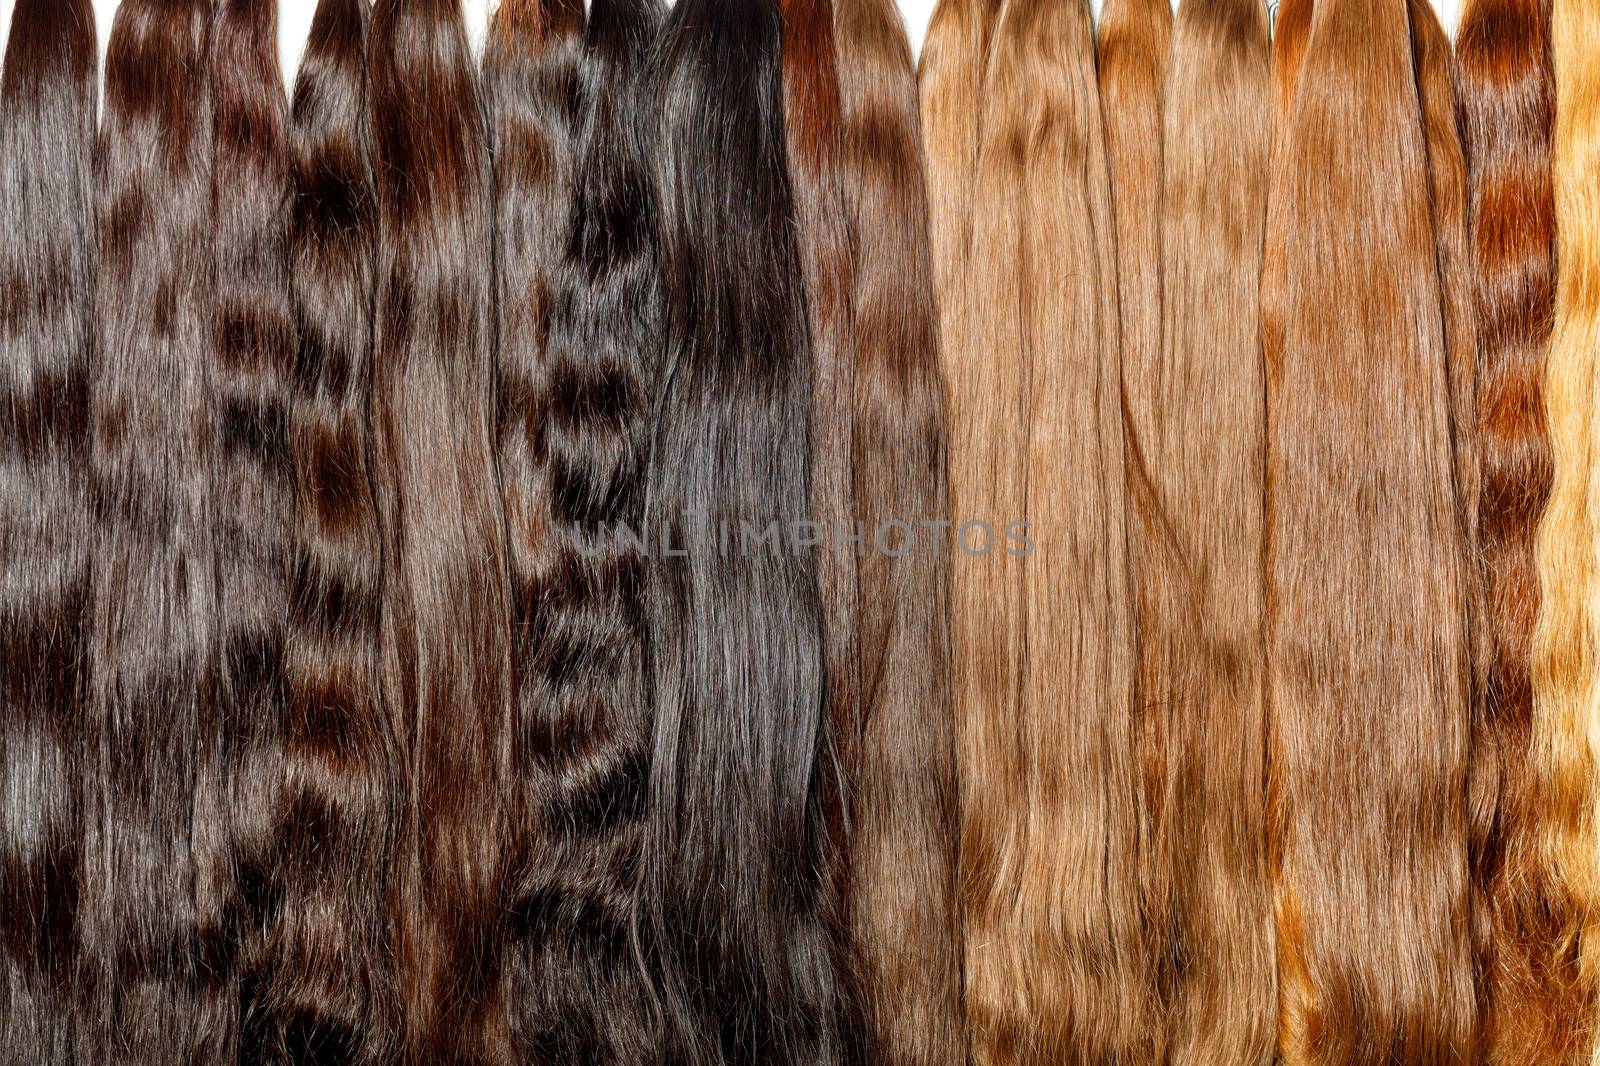 Natural chocolate colored shiny healthy human hair bundles for extension and weave wigs making.